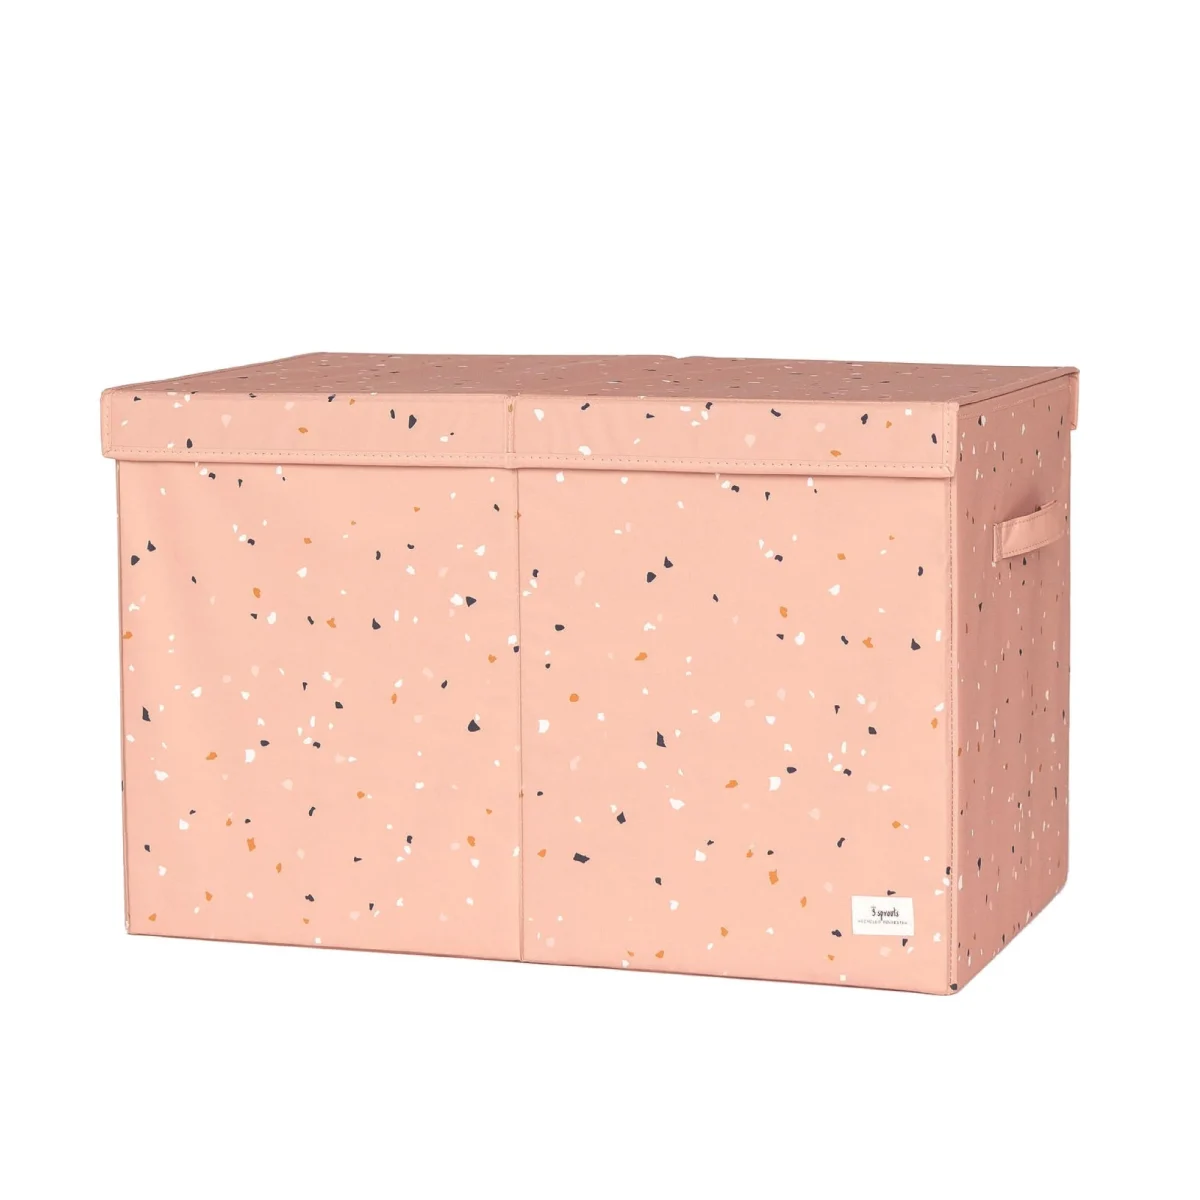 FCTCL 3Sprouts Folding Toy Chest Terrazzo Clay 1 1024x1024@2x